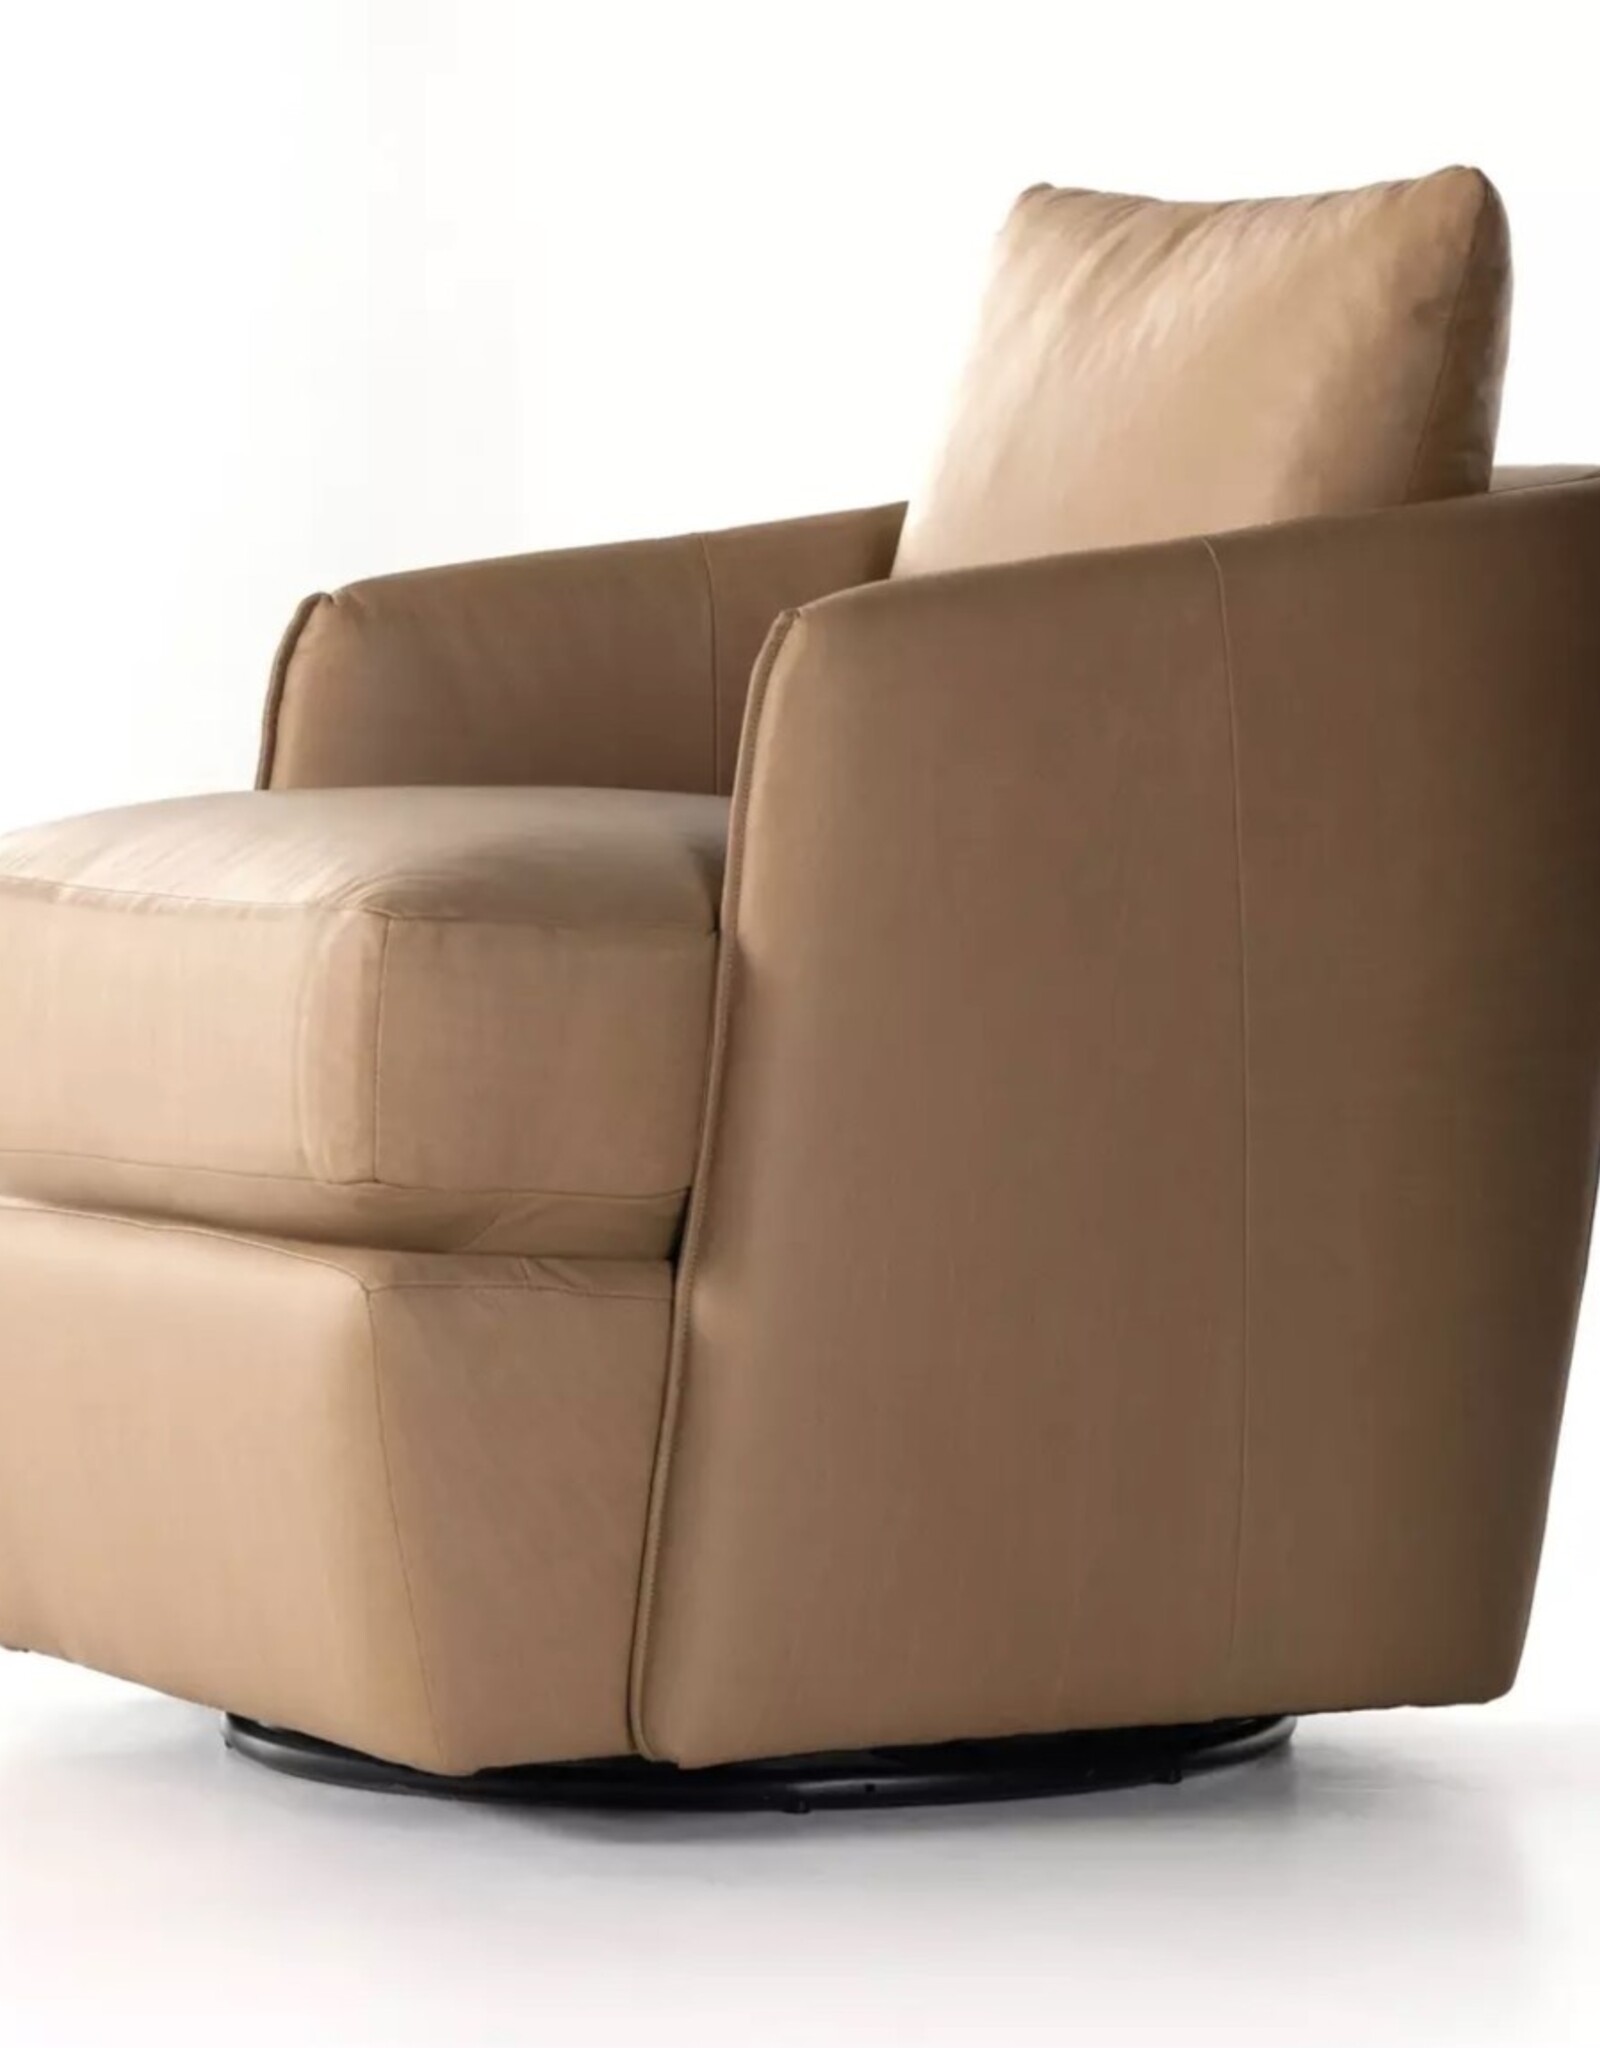 Whittaker Swivel Chair in Nantucket Taupe Leather